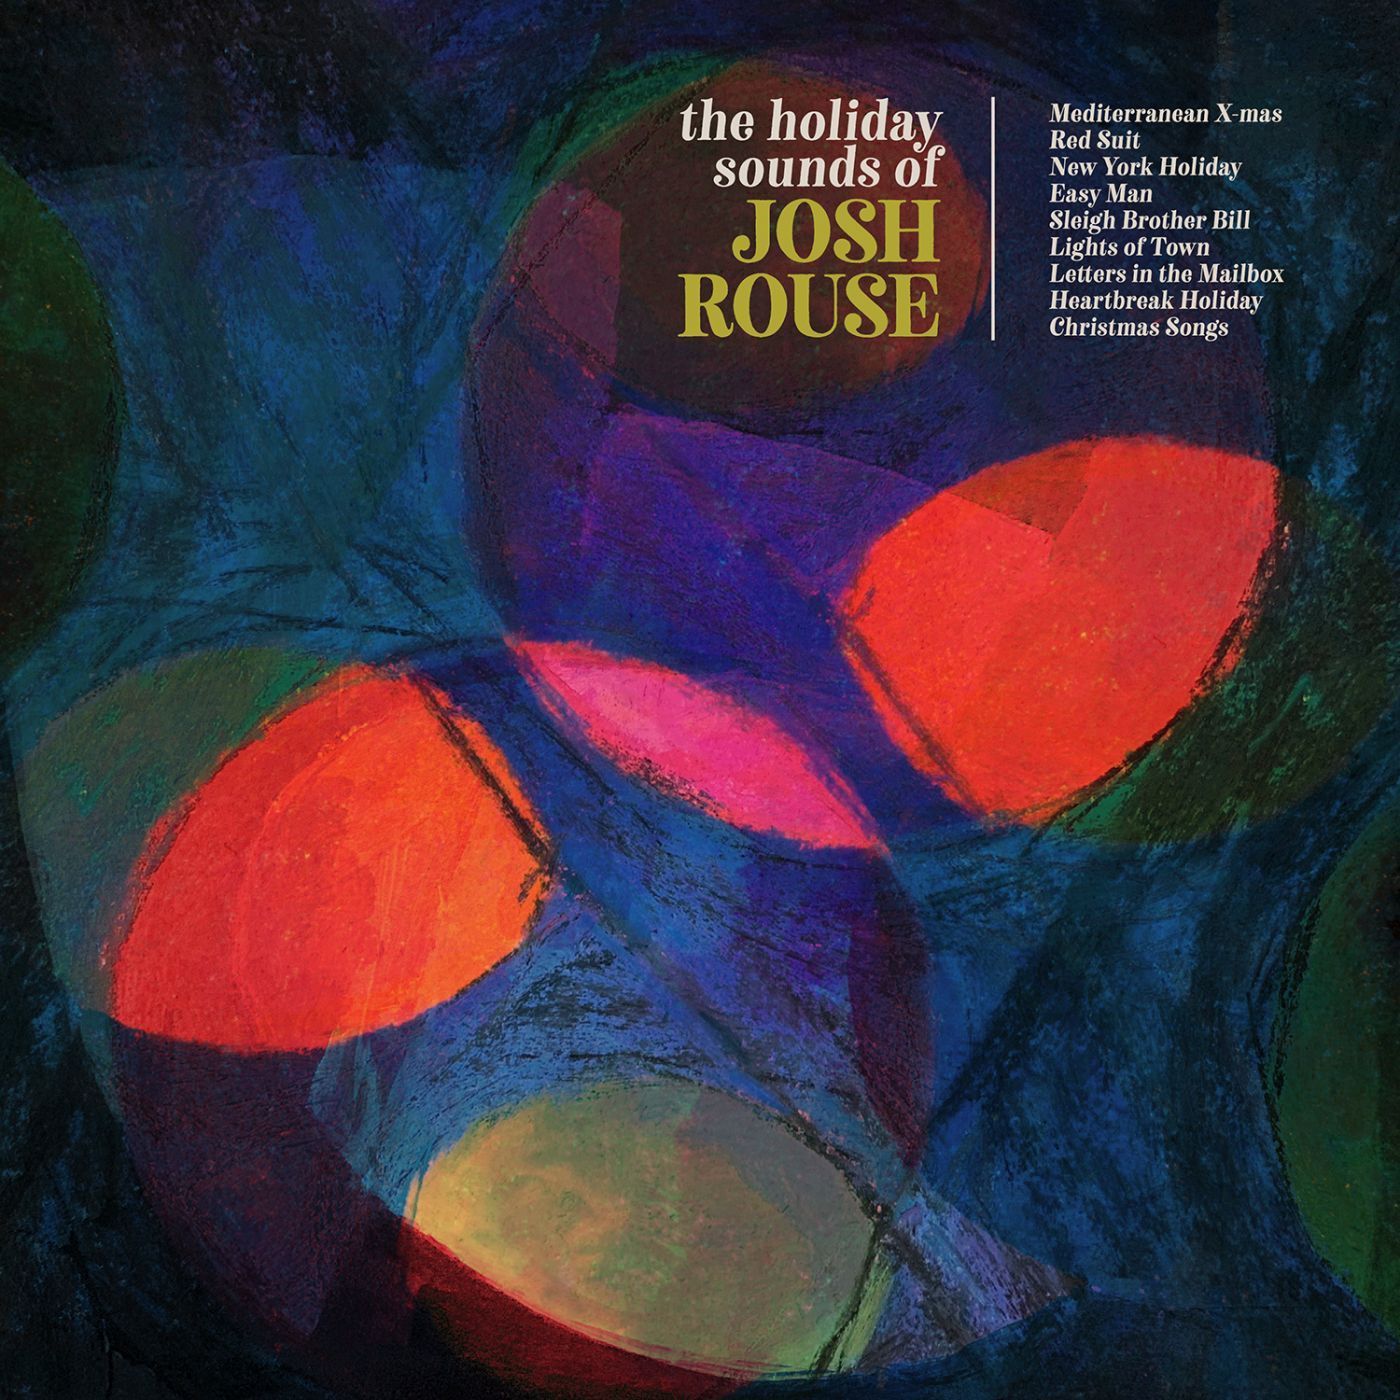 Josh Rouse - The Holiday Sounds of Josh Rouse (2019) [FLAC 24bit/44,1kHz]